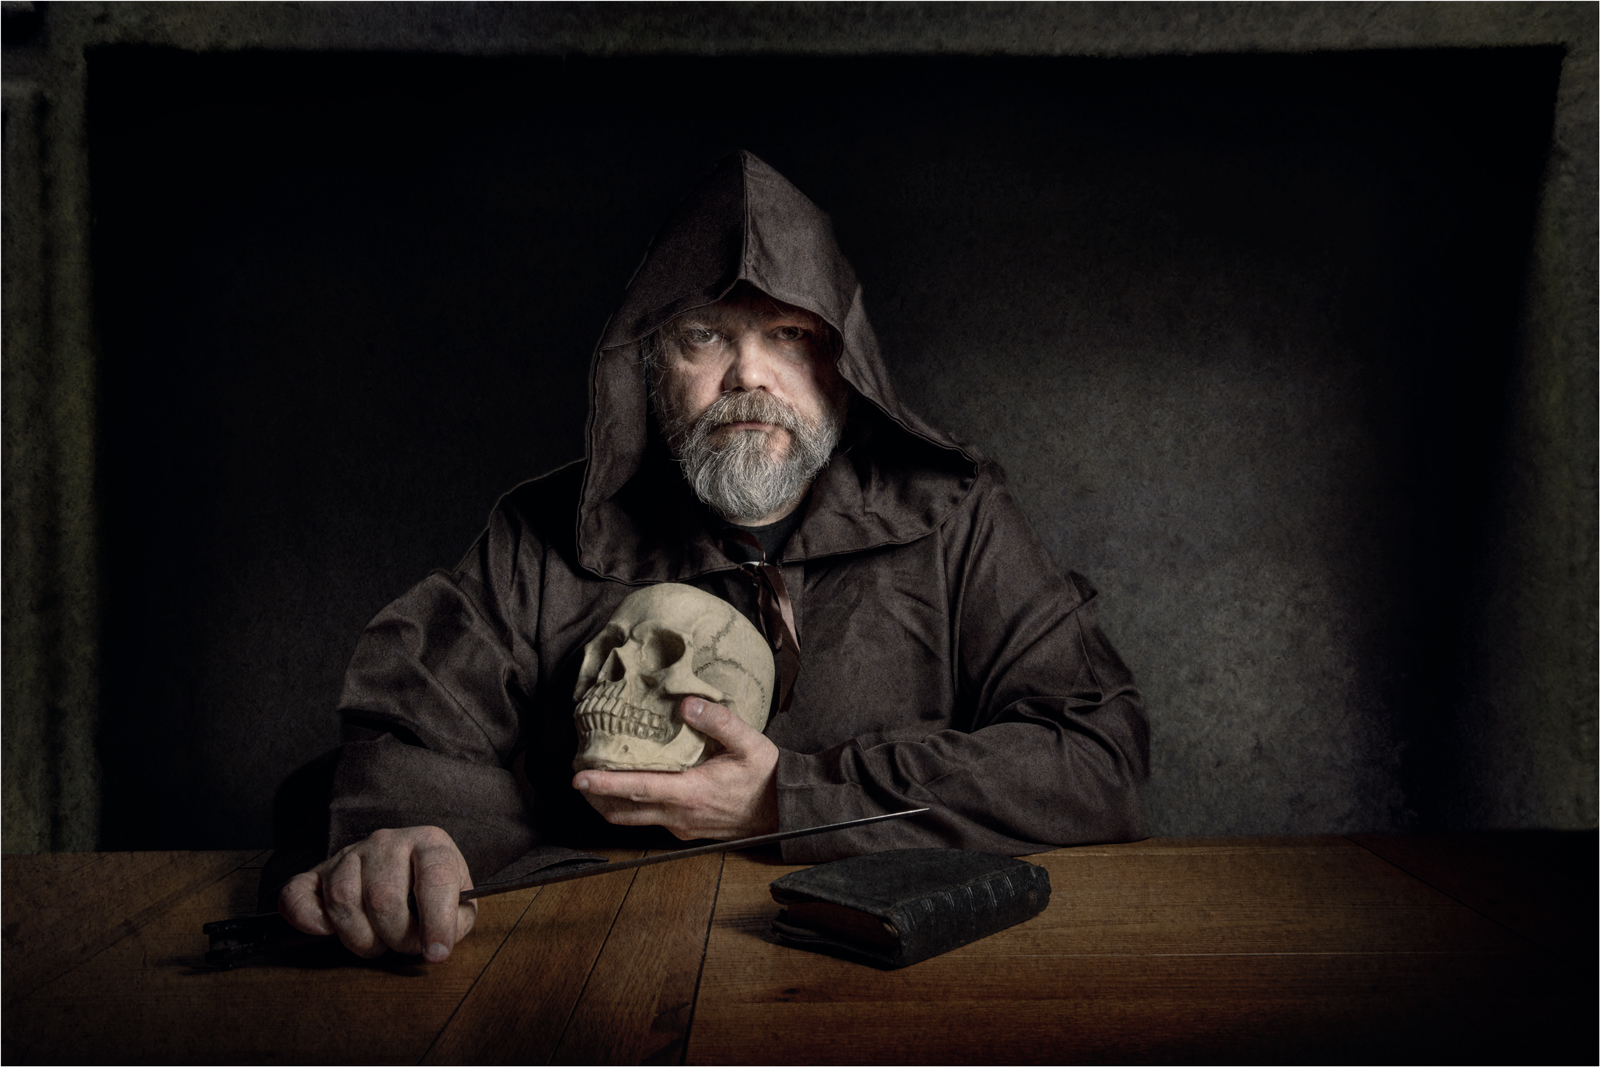 A self portrait Of Gary Hurdman dressed as a monk and holding a skull.